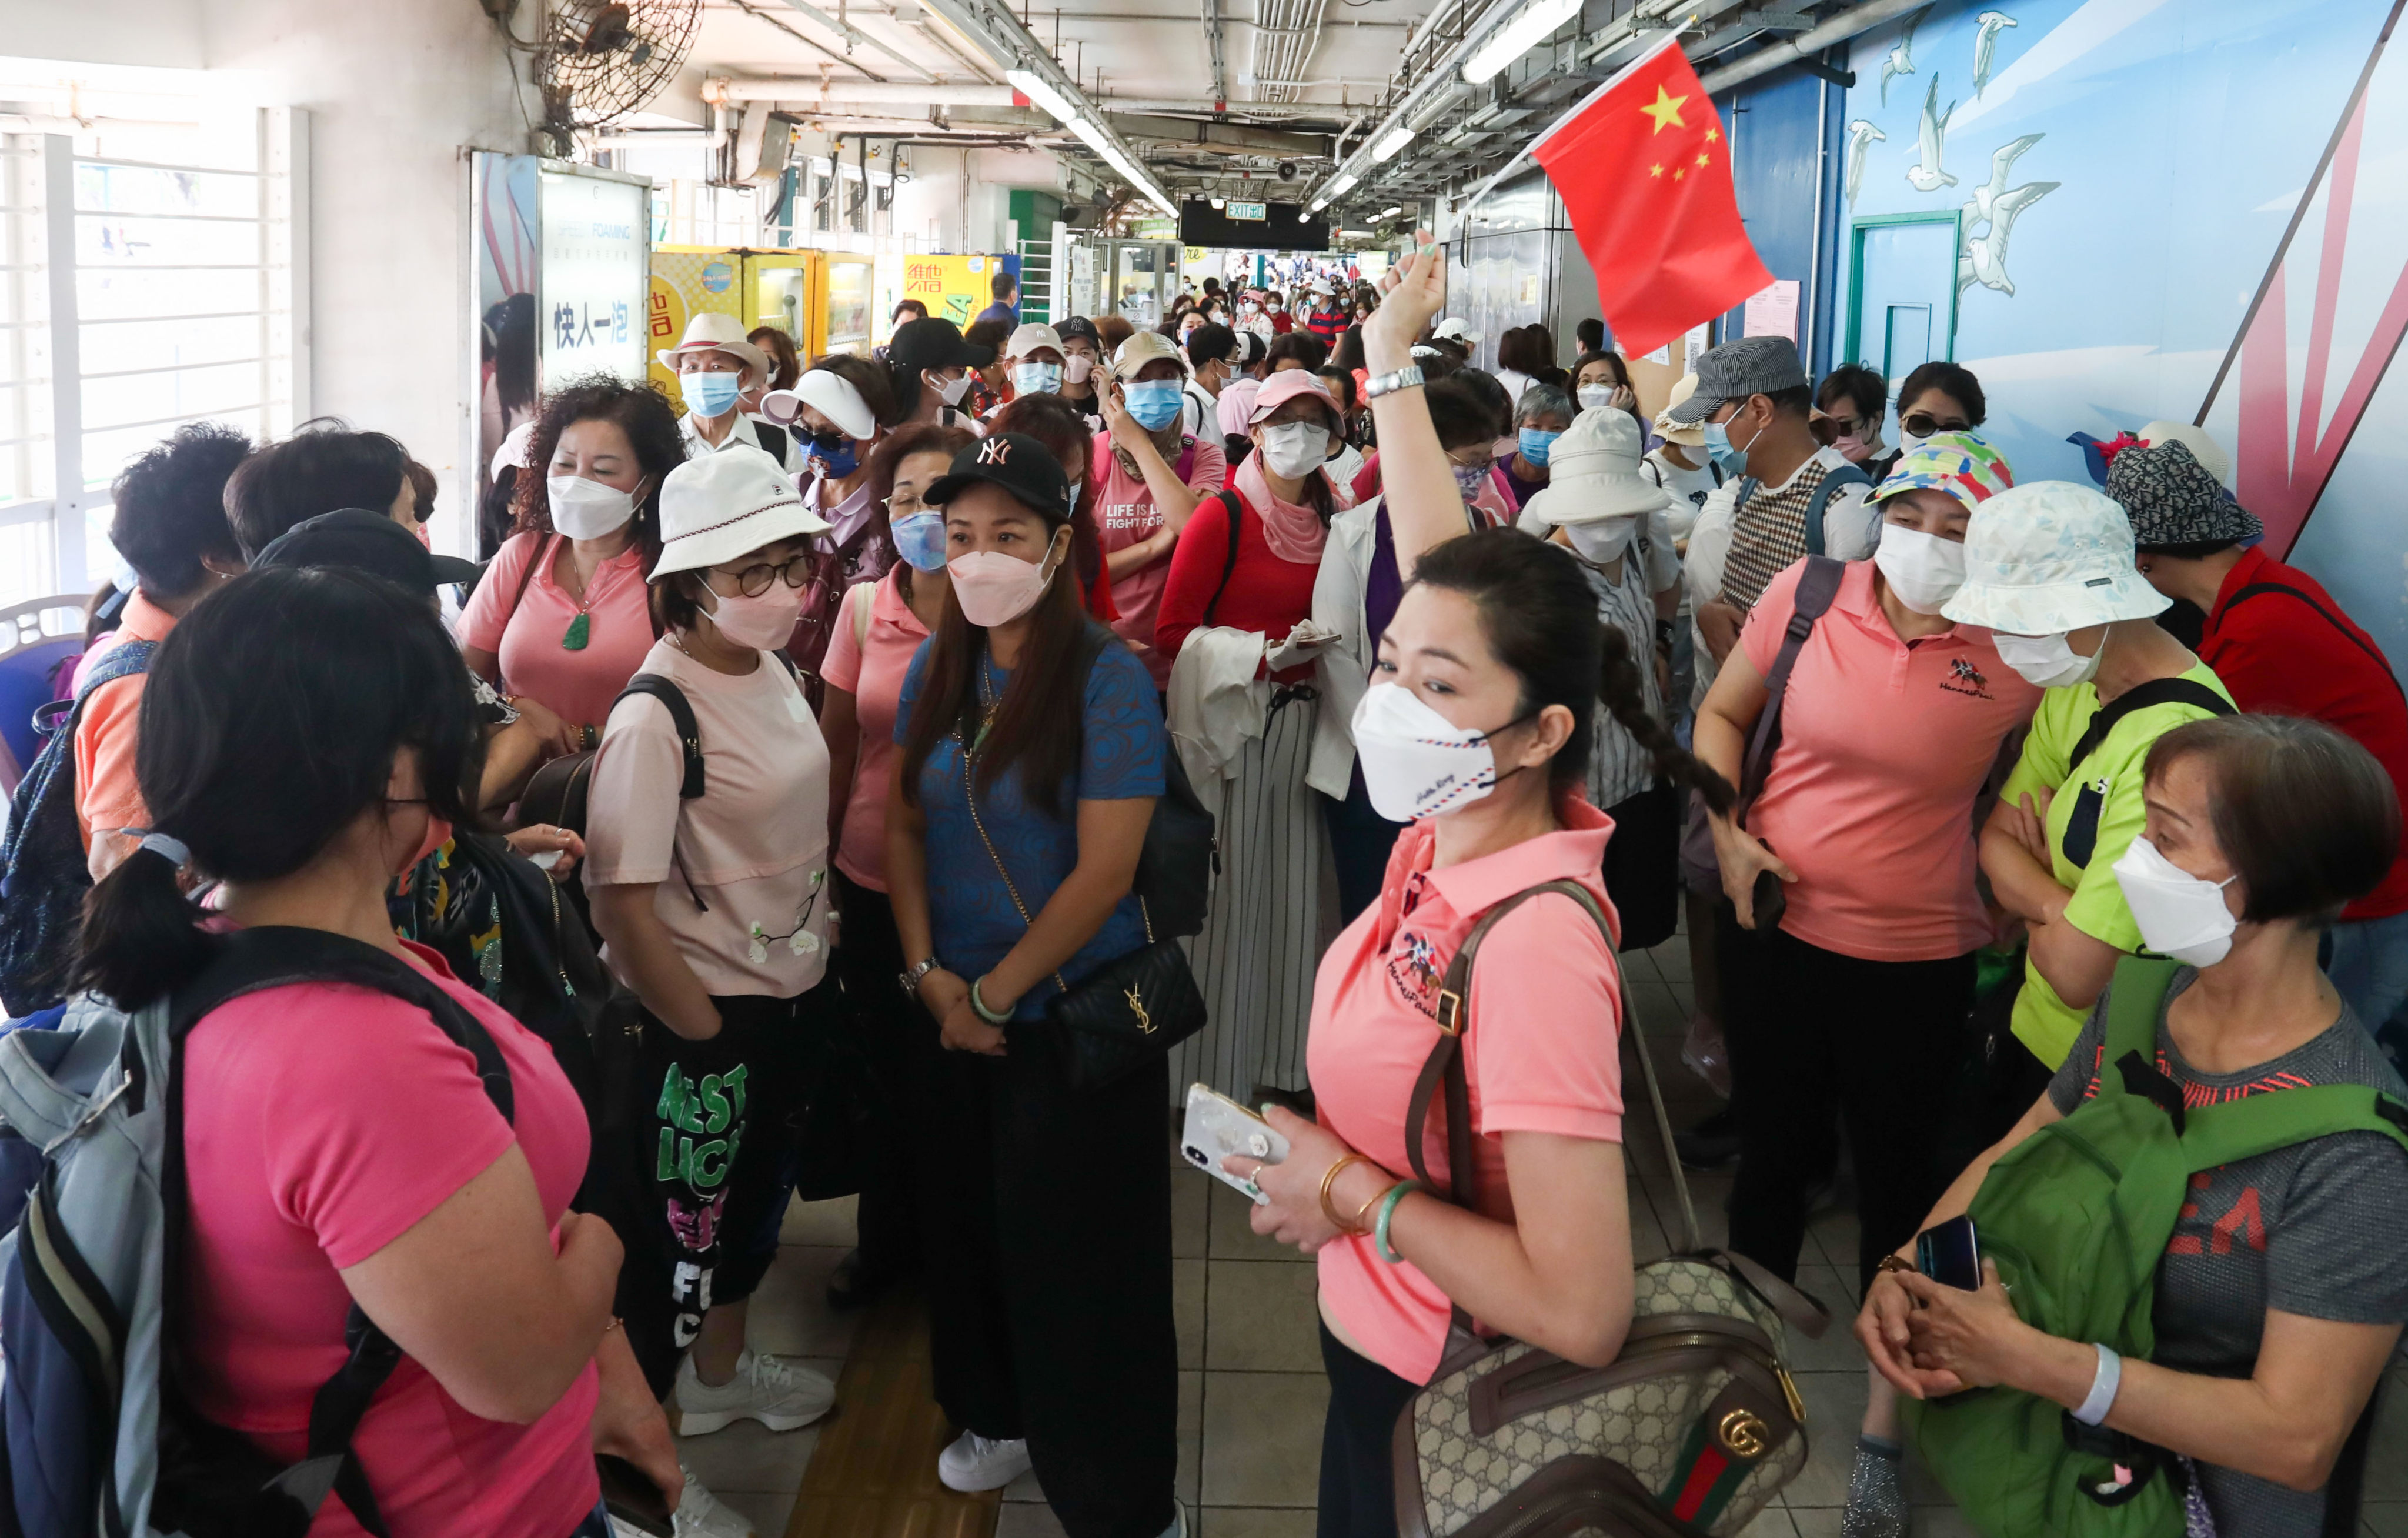 Crowds at the ferry pier headed for Cheung Chau, as thousands flocked there to enjoy the first long weekend since authorities further eased Covid-19 measures. Photo: Jonathan Wong